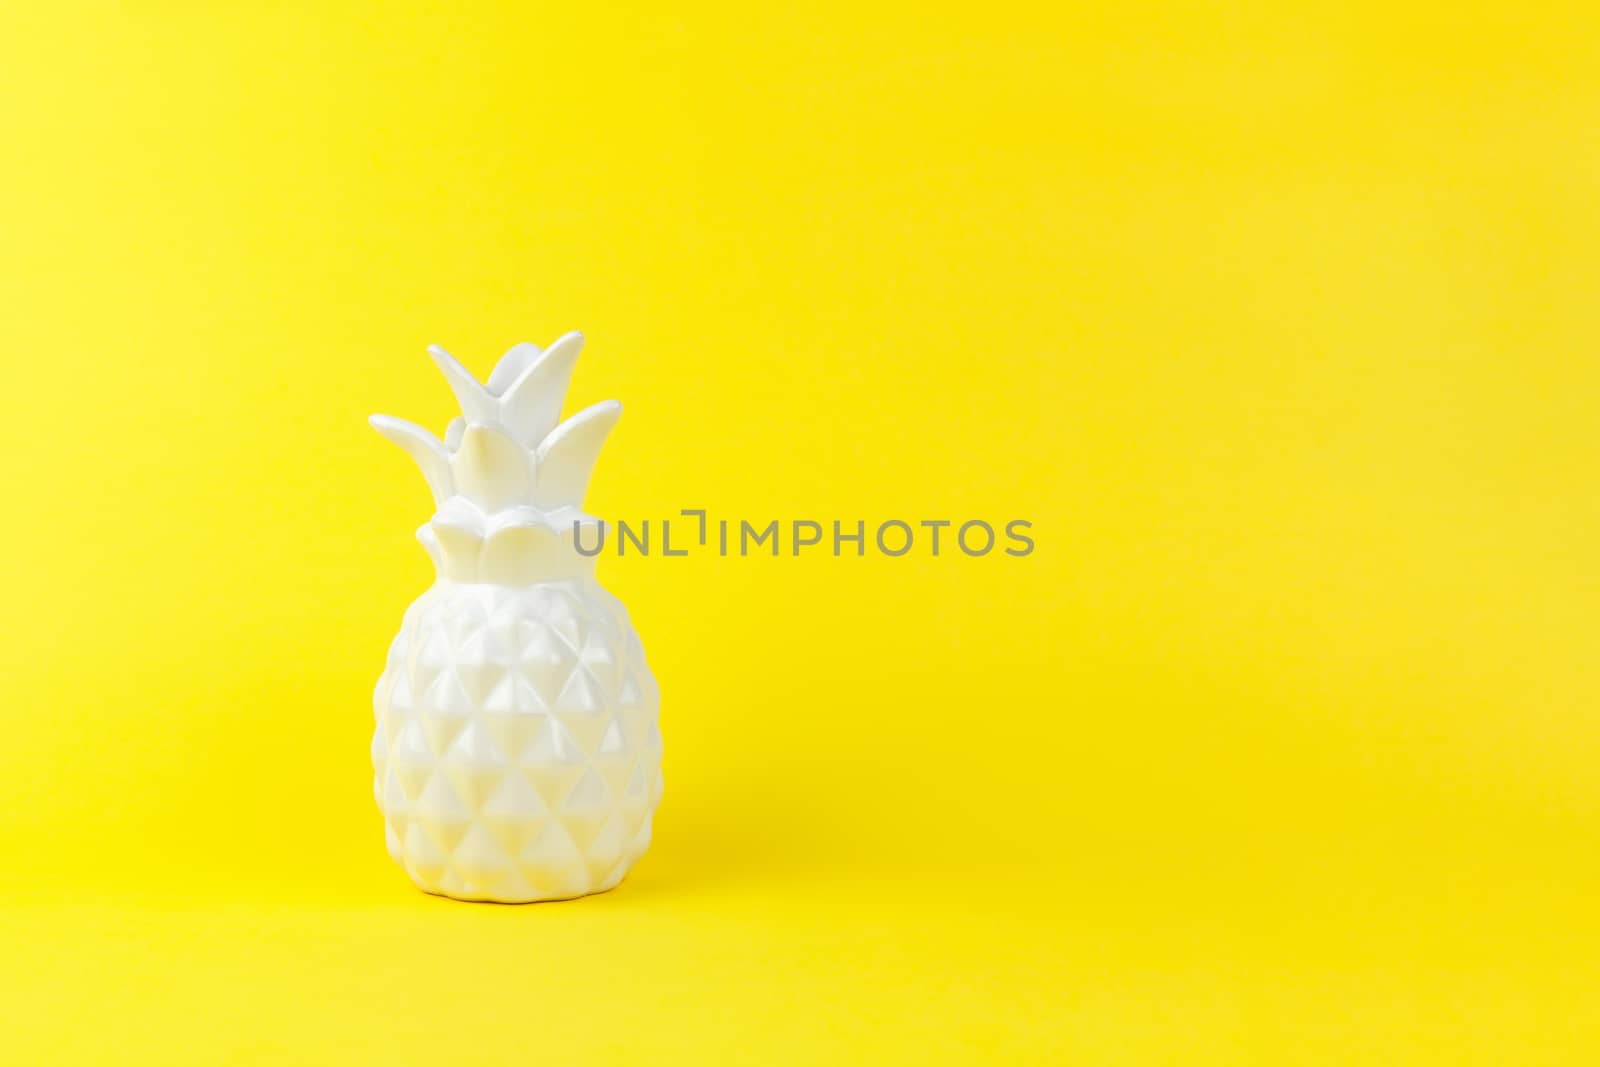 Trendy piece of interior white glossy ceramic pineapple on yellow paper background, copy space. Minimal style of decor concept. Horizontal. For lifestyle, interior blog, social media, poster by ALLUNEED